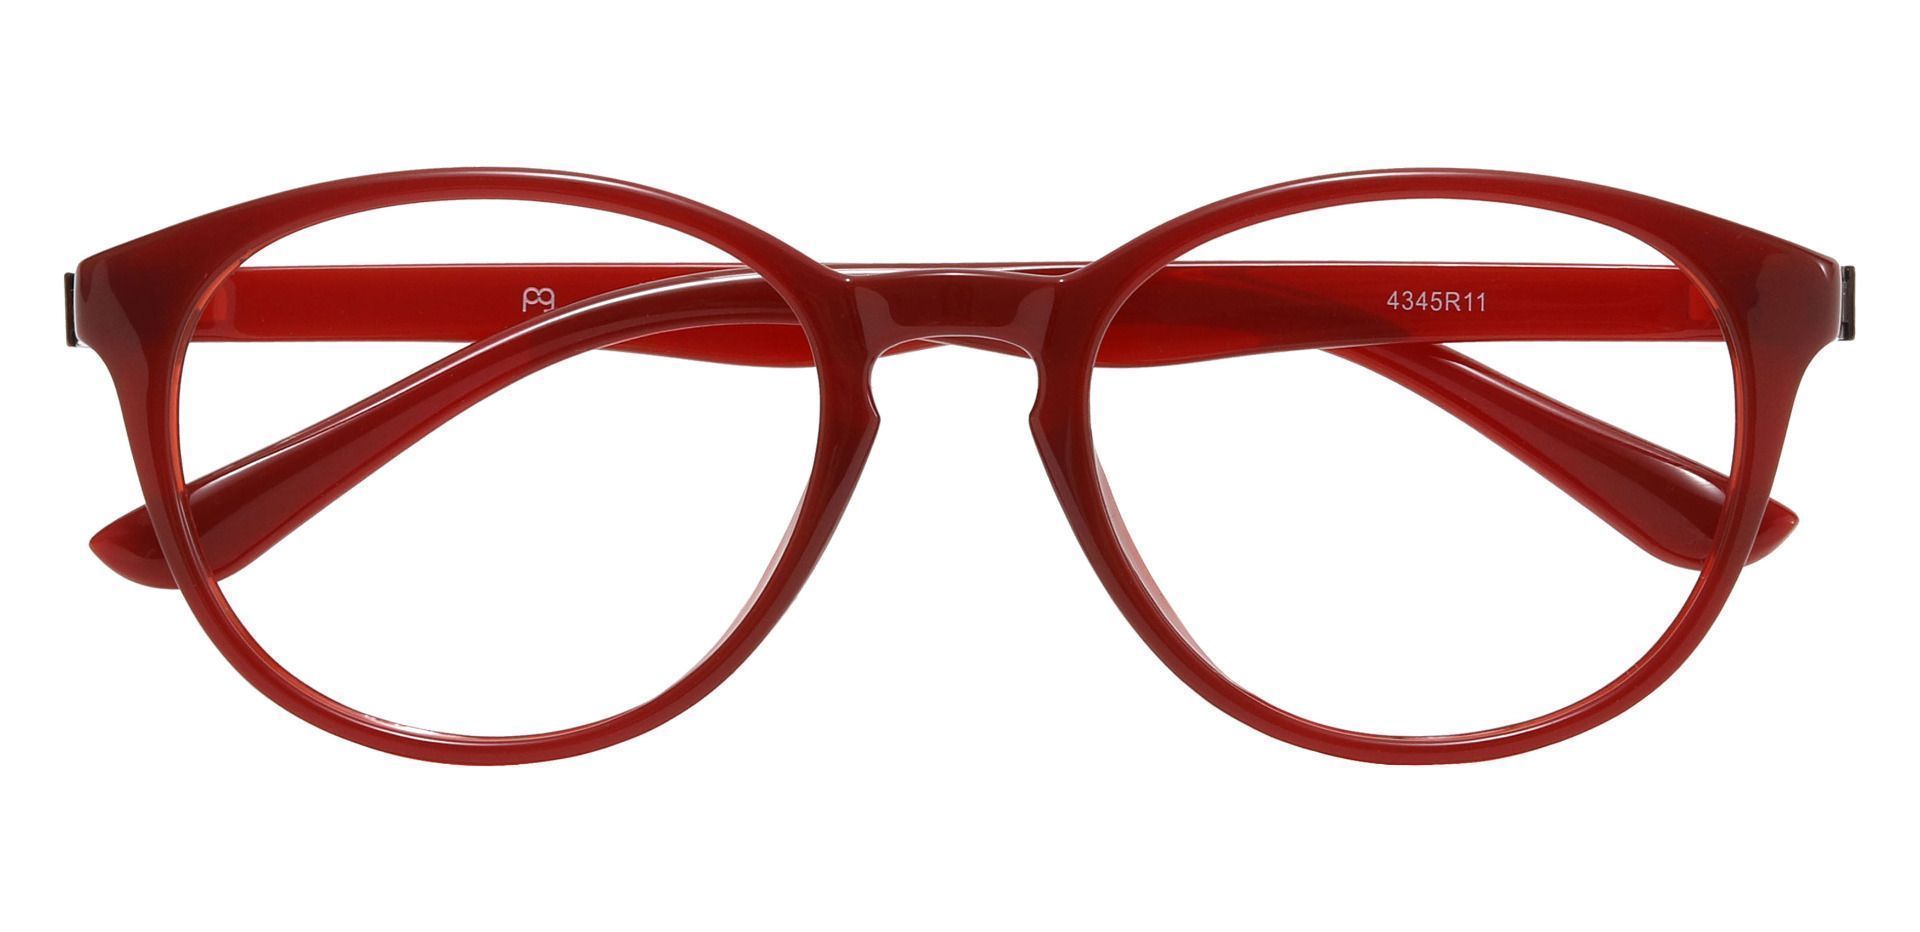 Celia Oval Lined Bifocal Glasses - Red